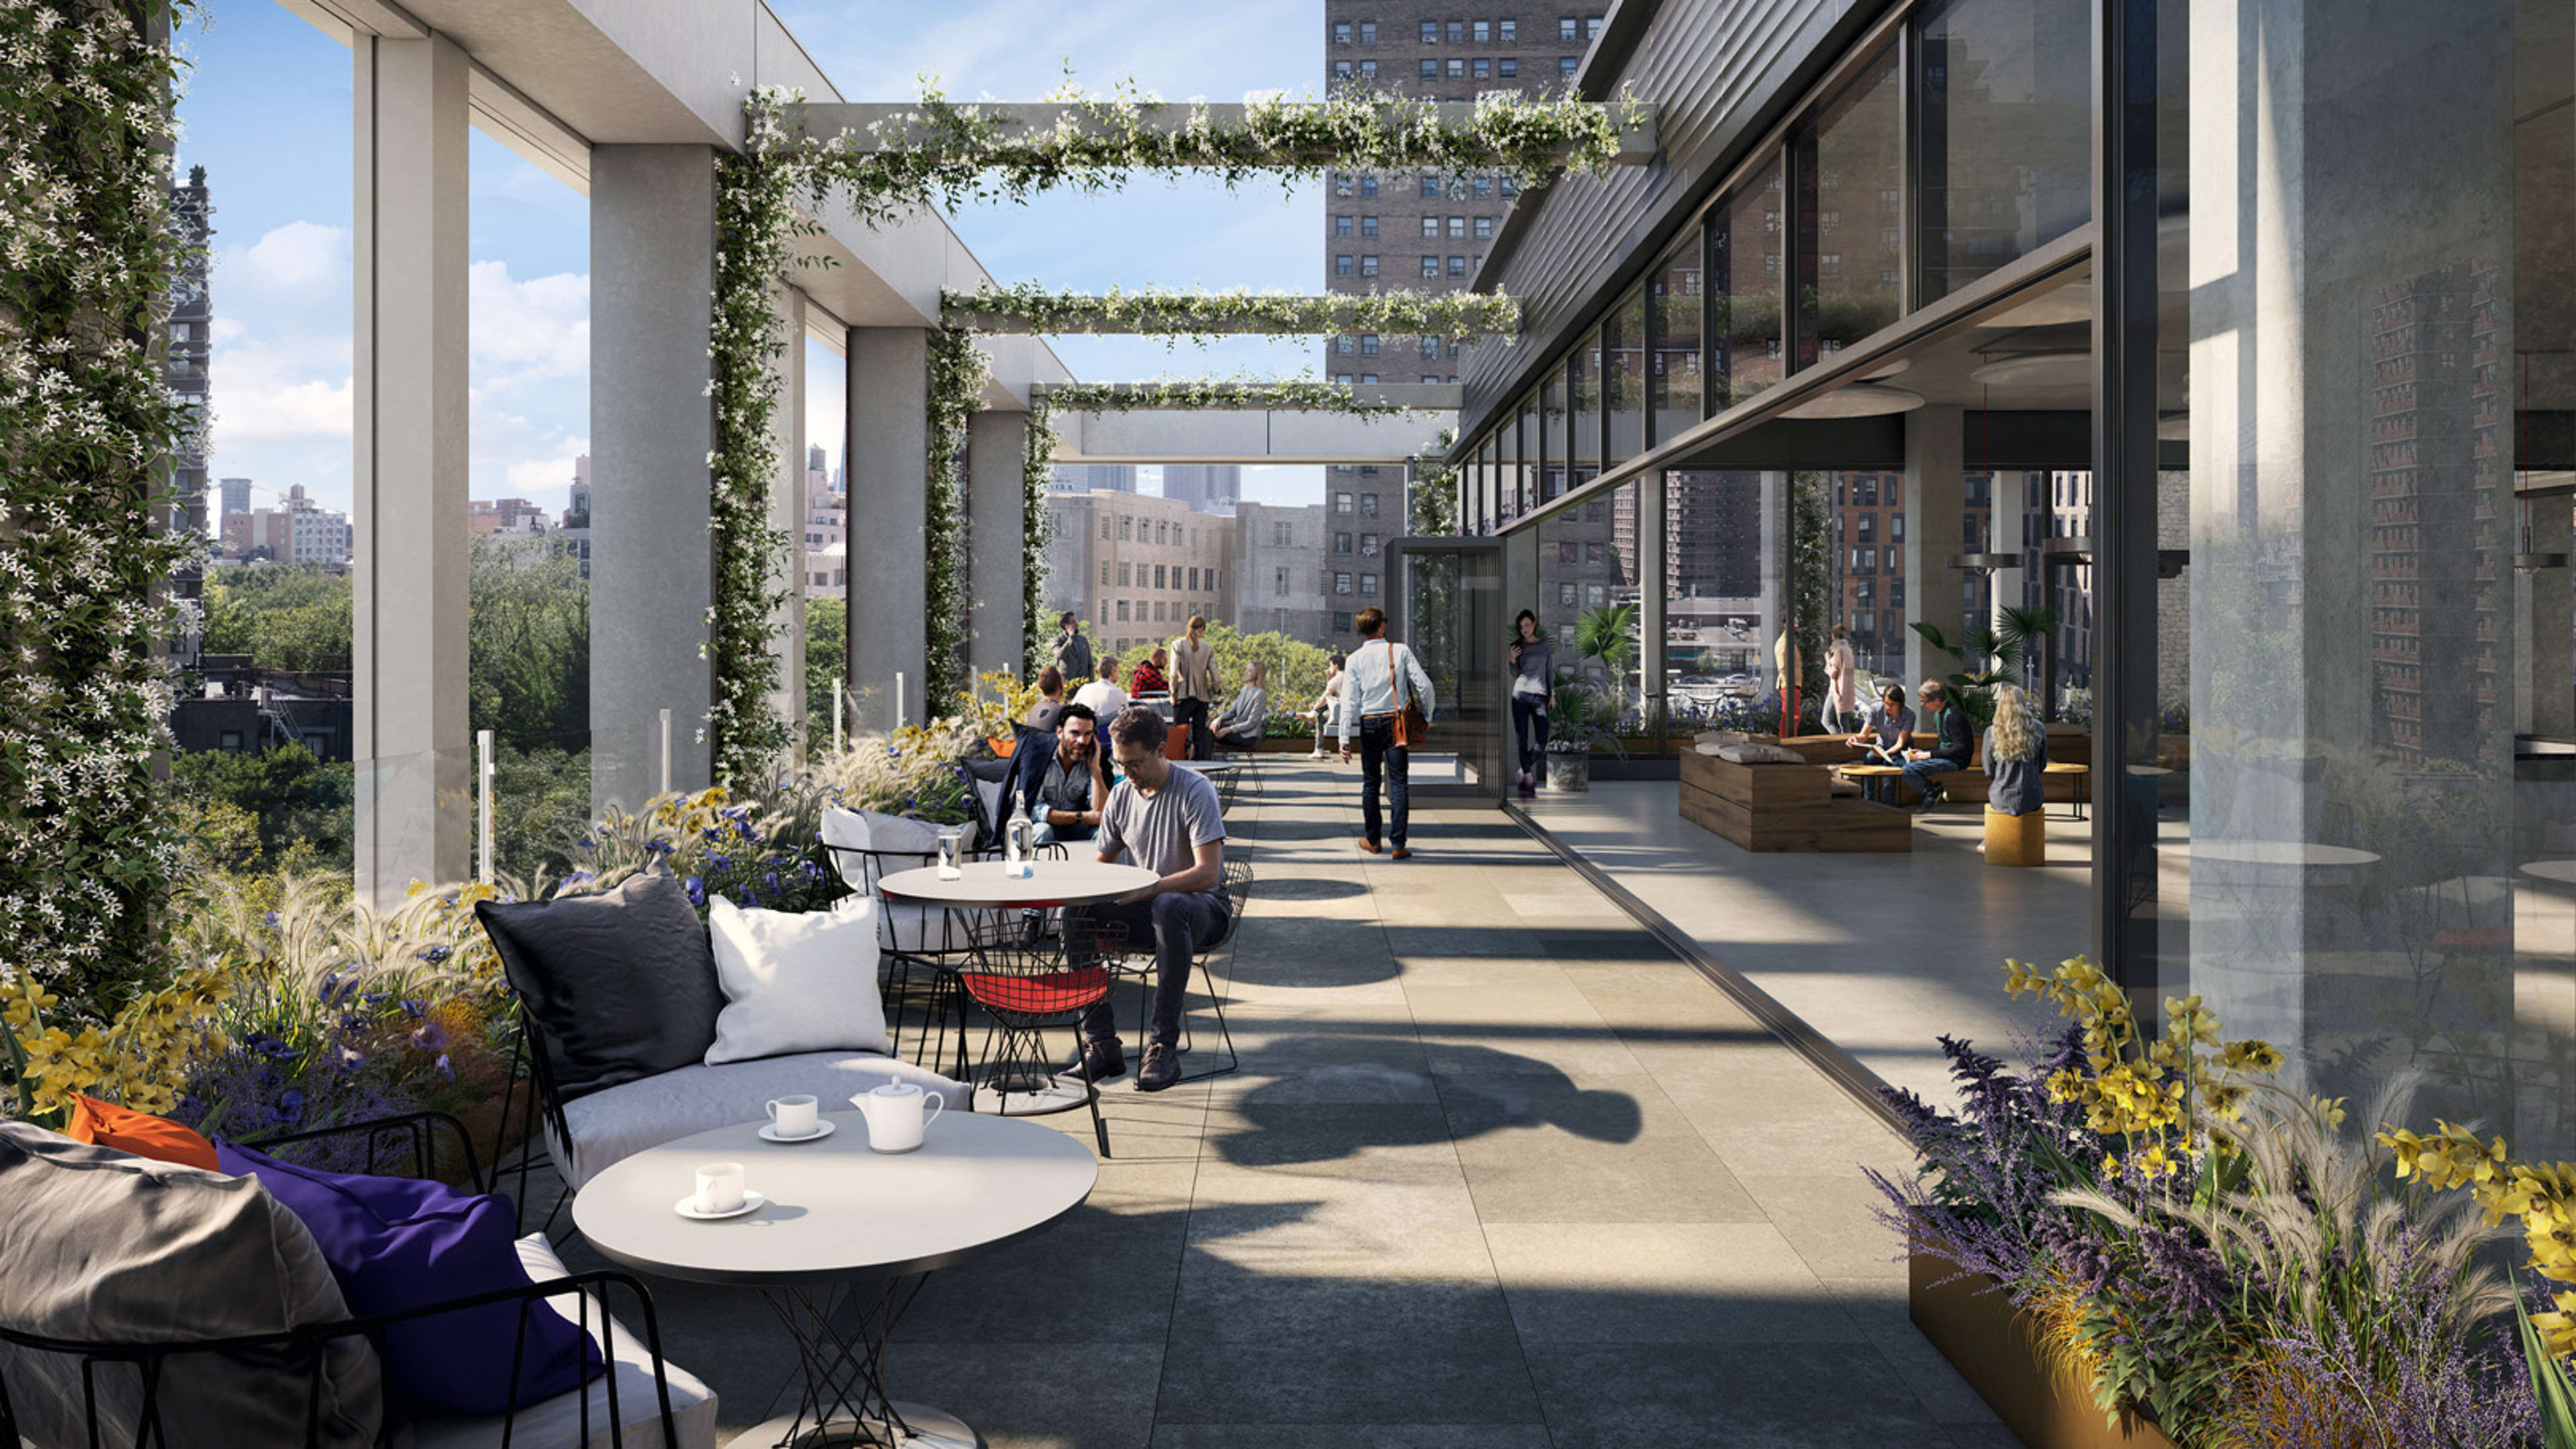 The office of the future is outdoors